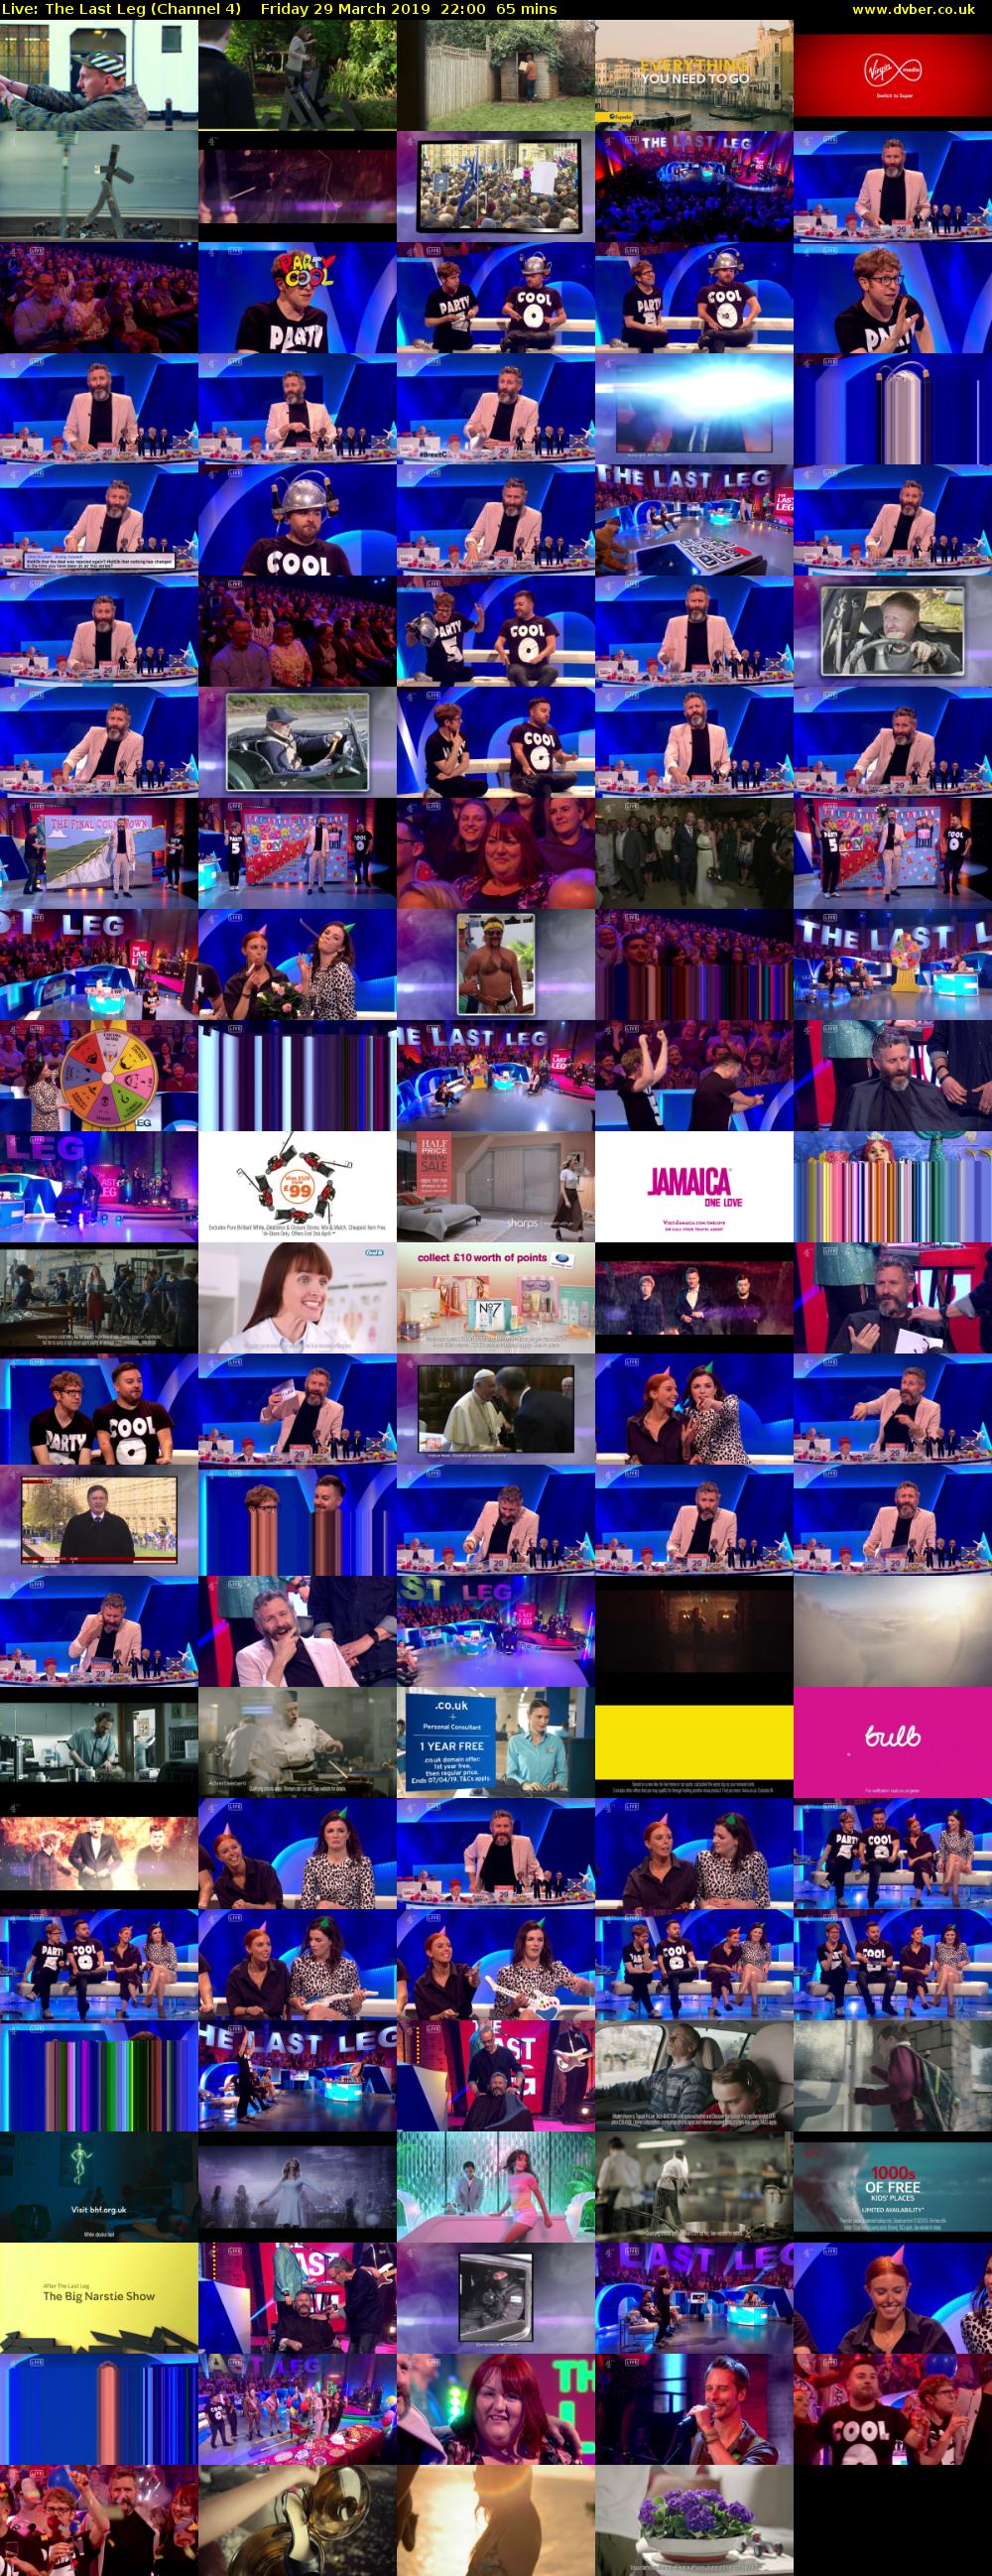 Live: The Last Leg (Channel 4) Friday 29 March 2019 22:00 - 23:05